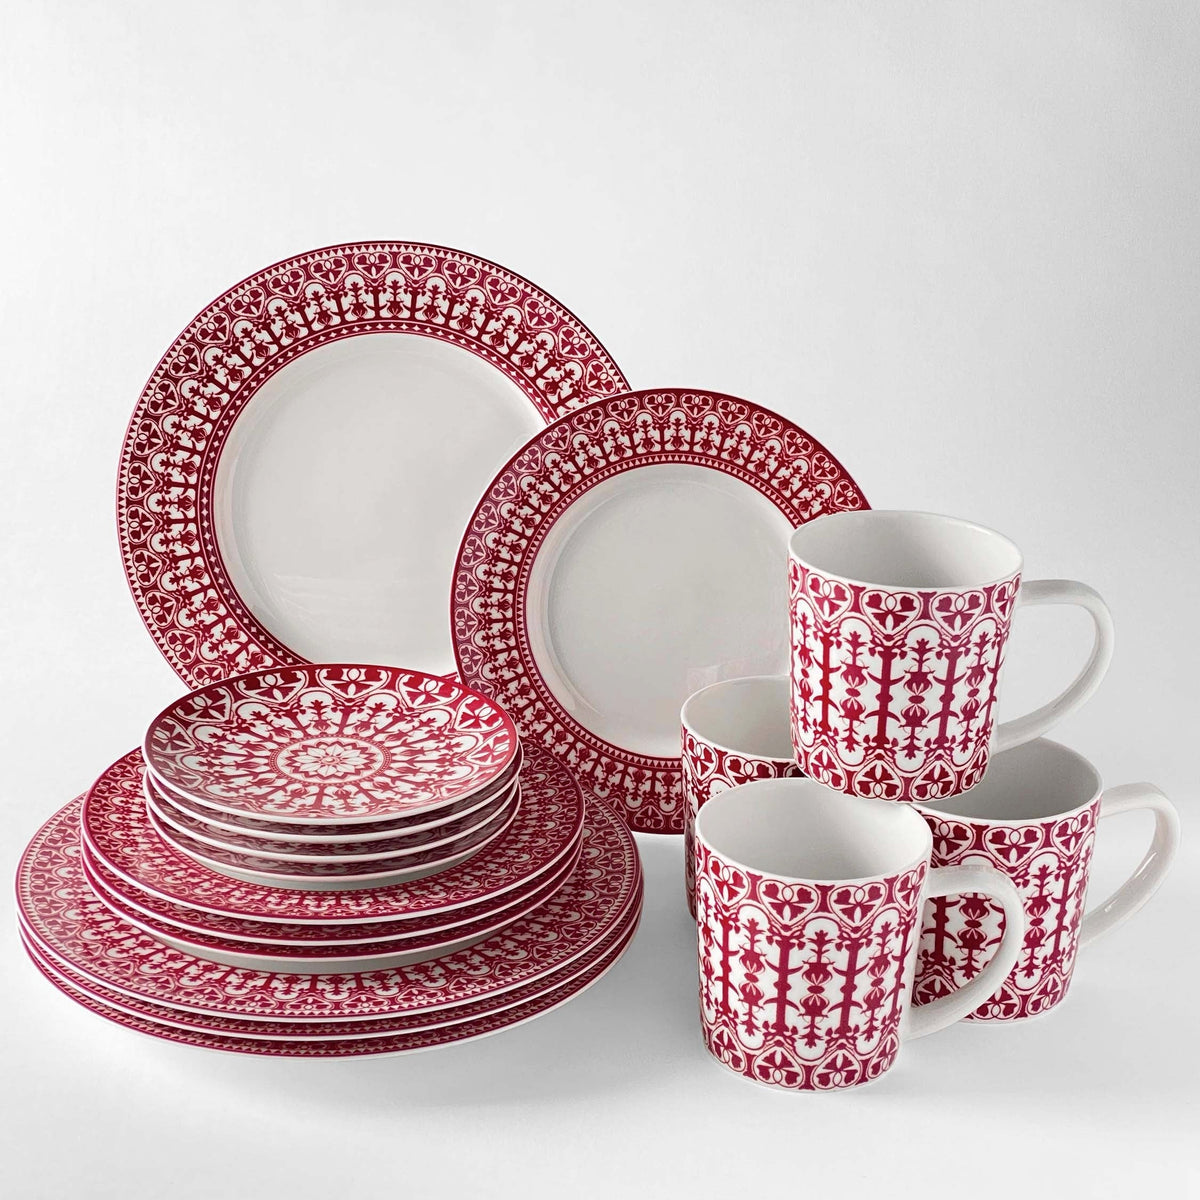 A set of heirloom-quality red and white dinnerware featuring Casablanca Crimson Small Plates by Caskata Artisanal Home, bowls, and mugs with intricate patterns and ornate scrollwork displayed on a white background.